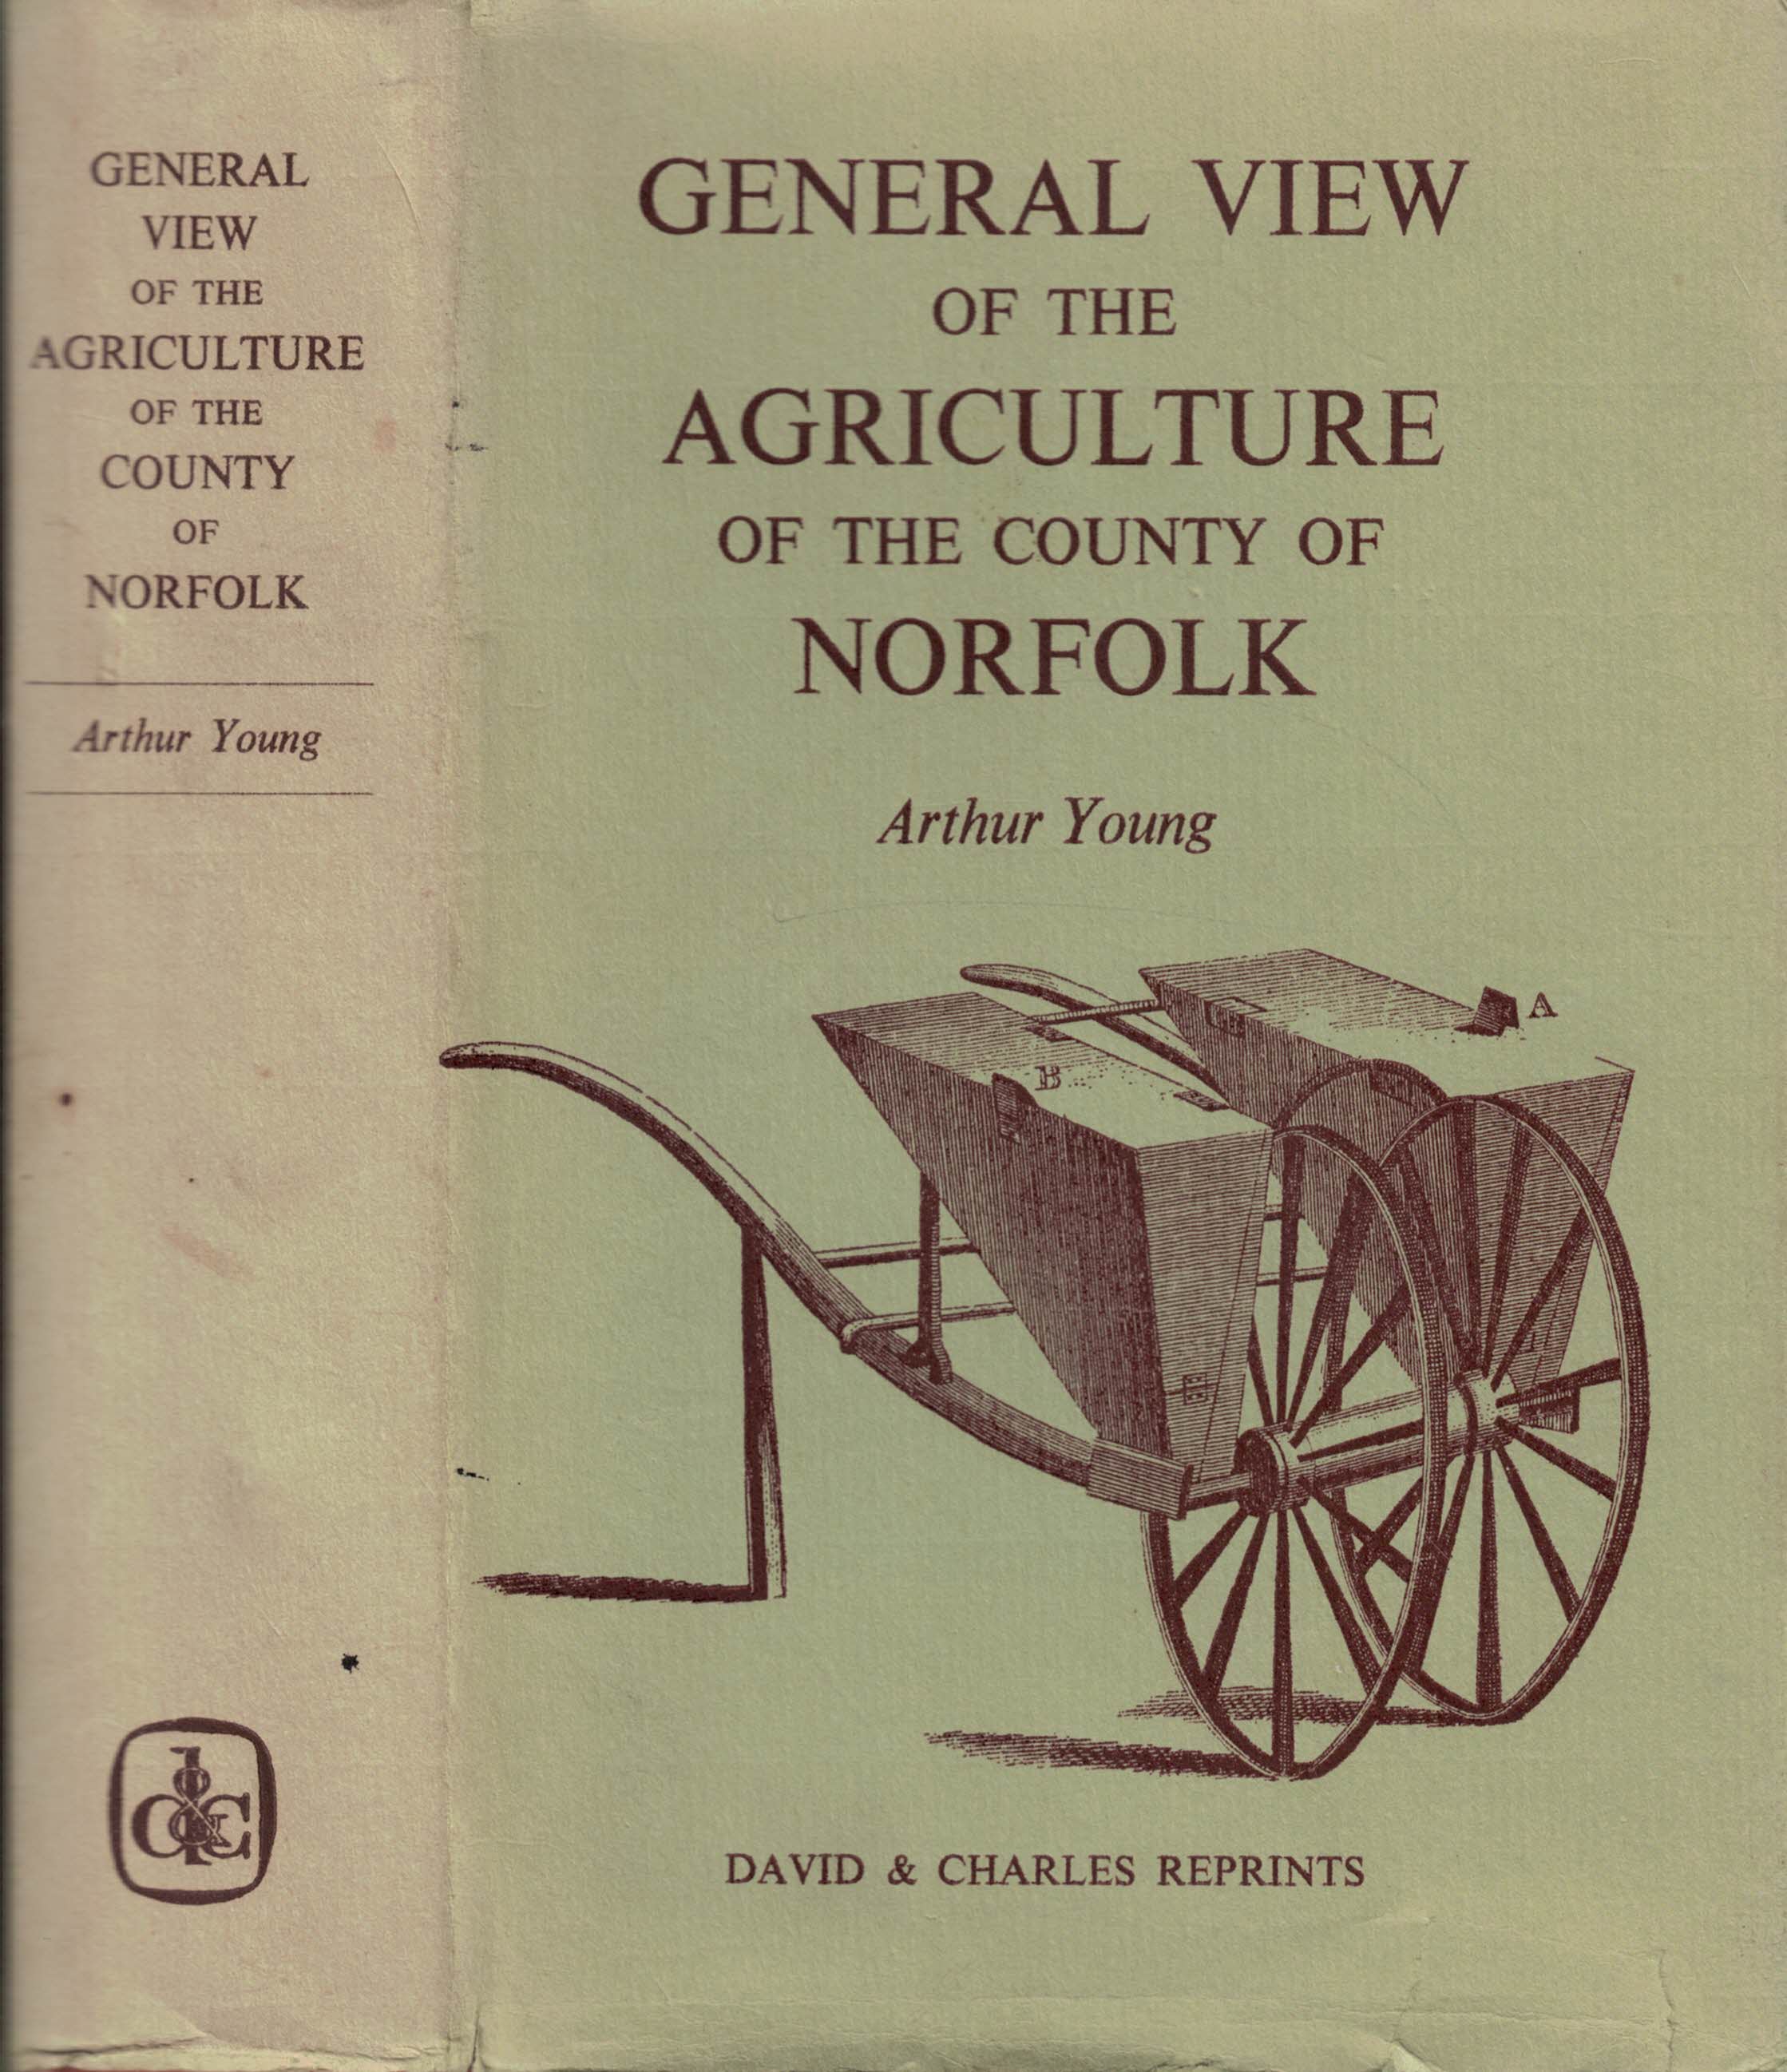 General View of the Agriculture of the County of Norfolk